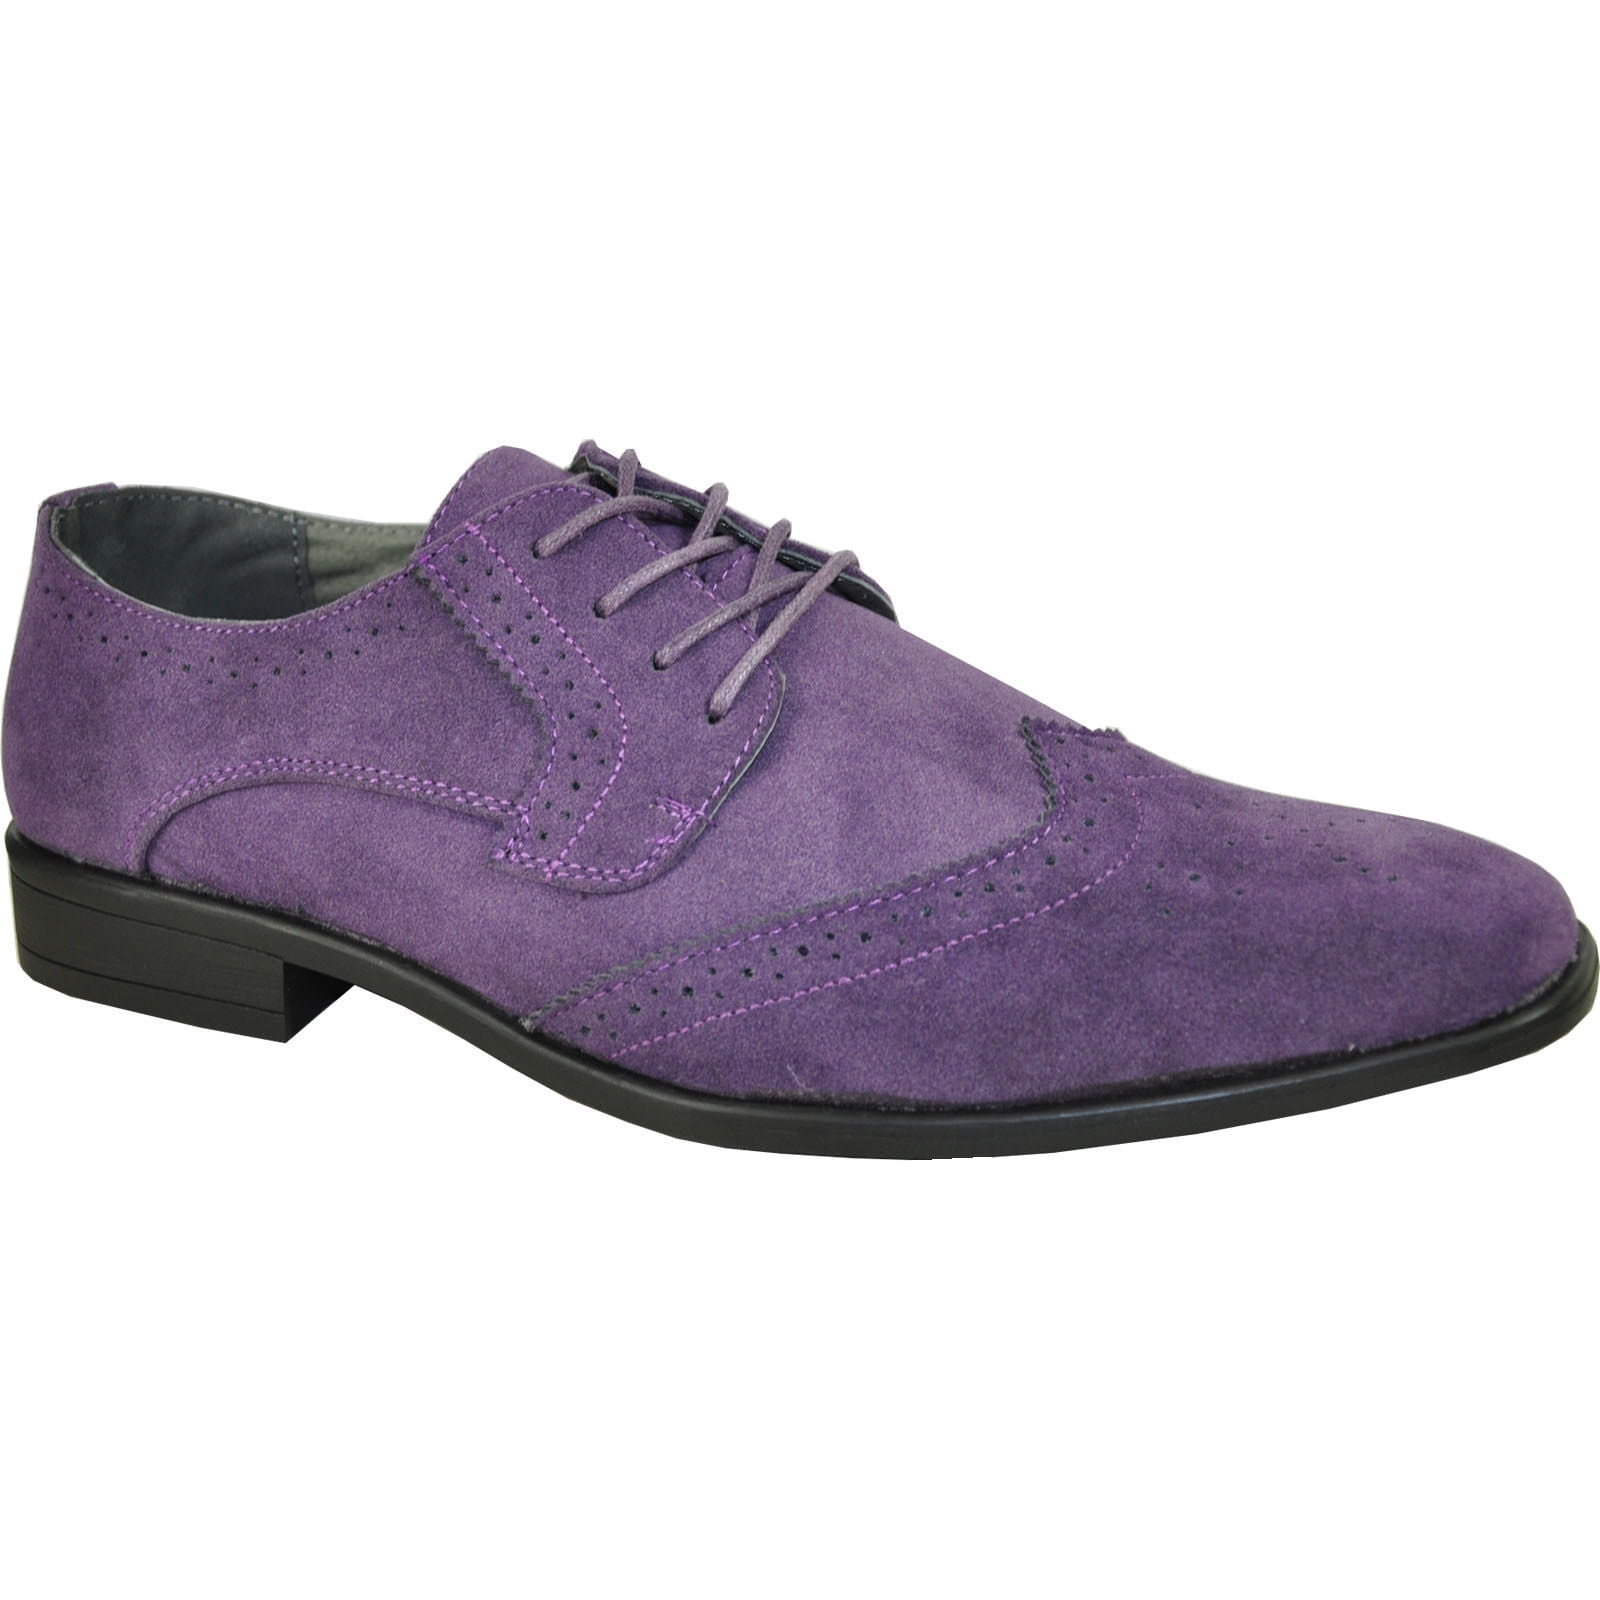 Amali Men's Lace Up Oxford with Perforations and a Linen Vamp